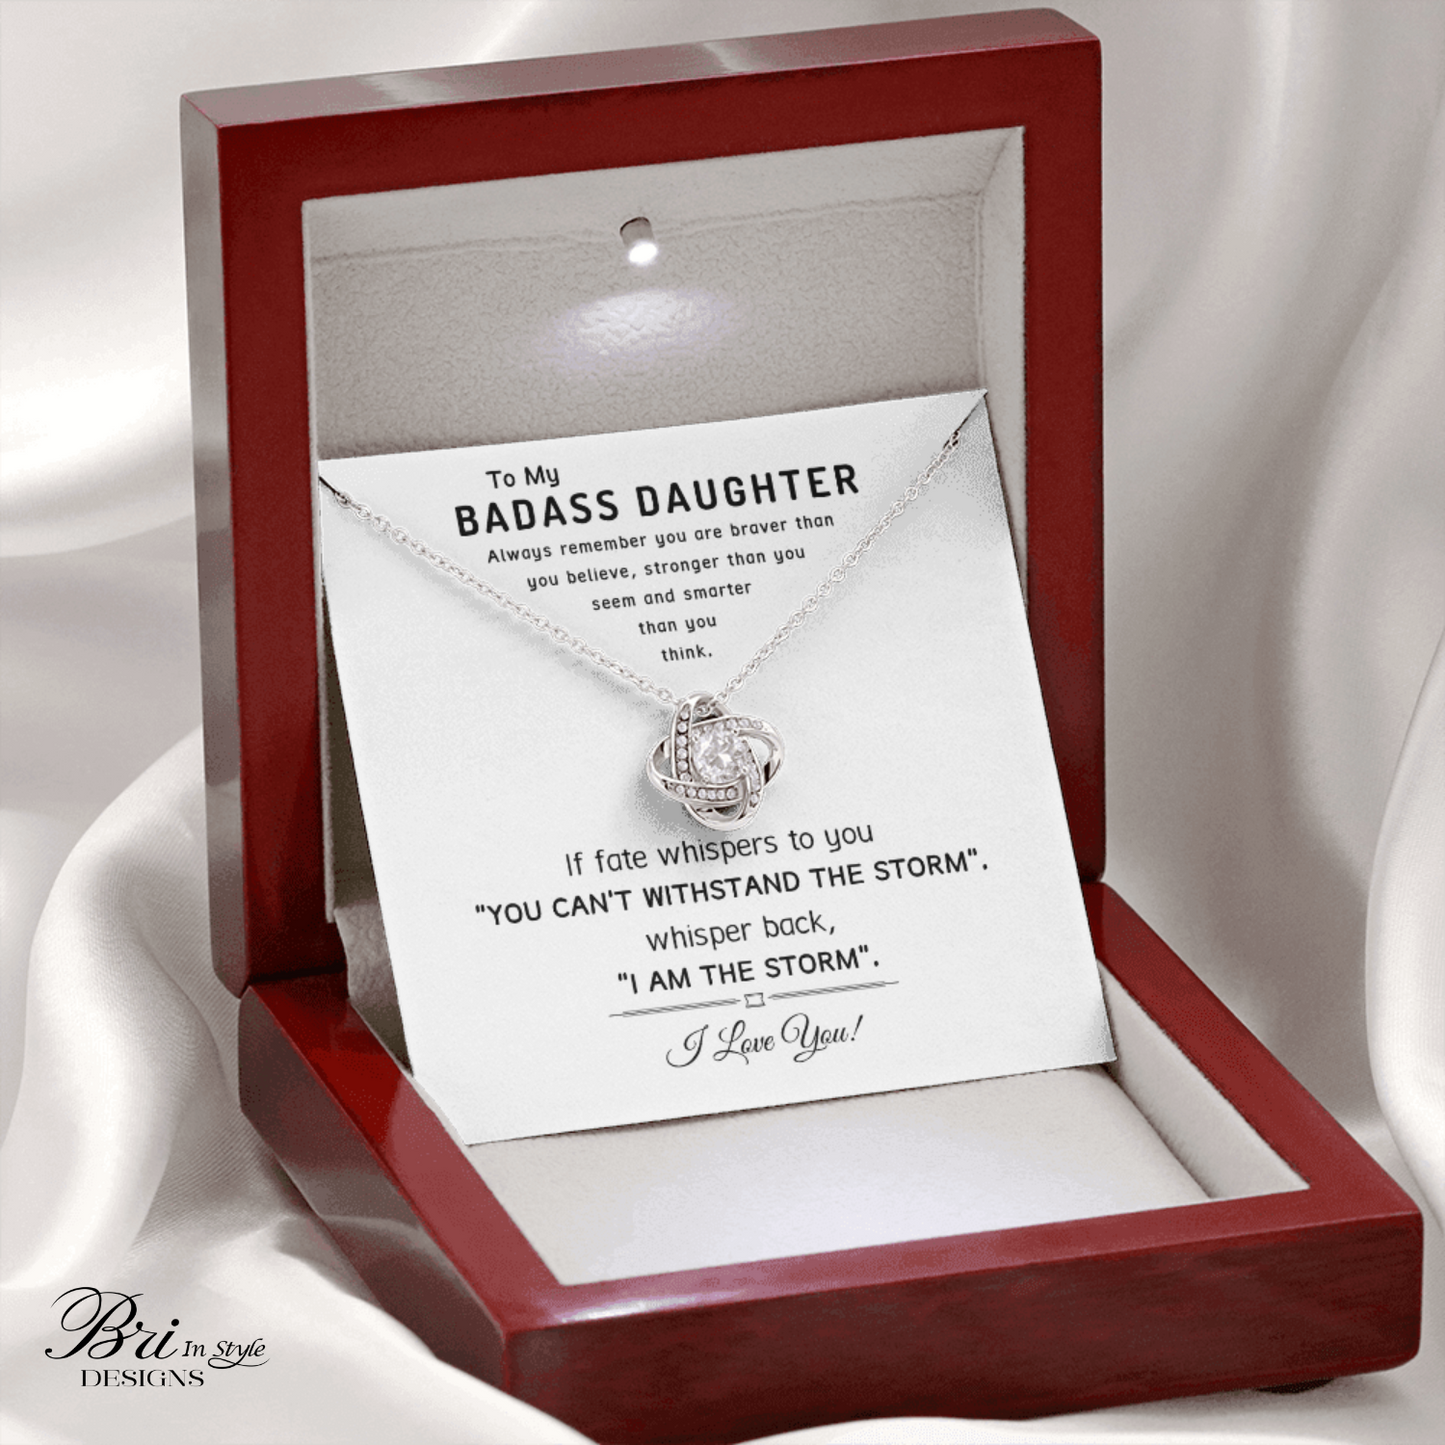 Badass Daughter-Fate Whispers To You-Love Knot Necklace